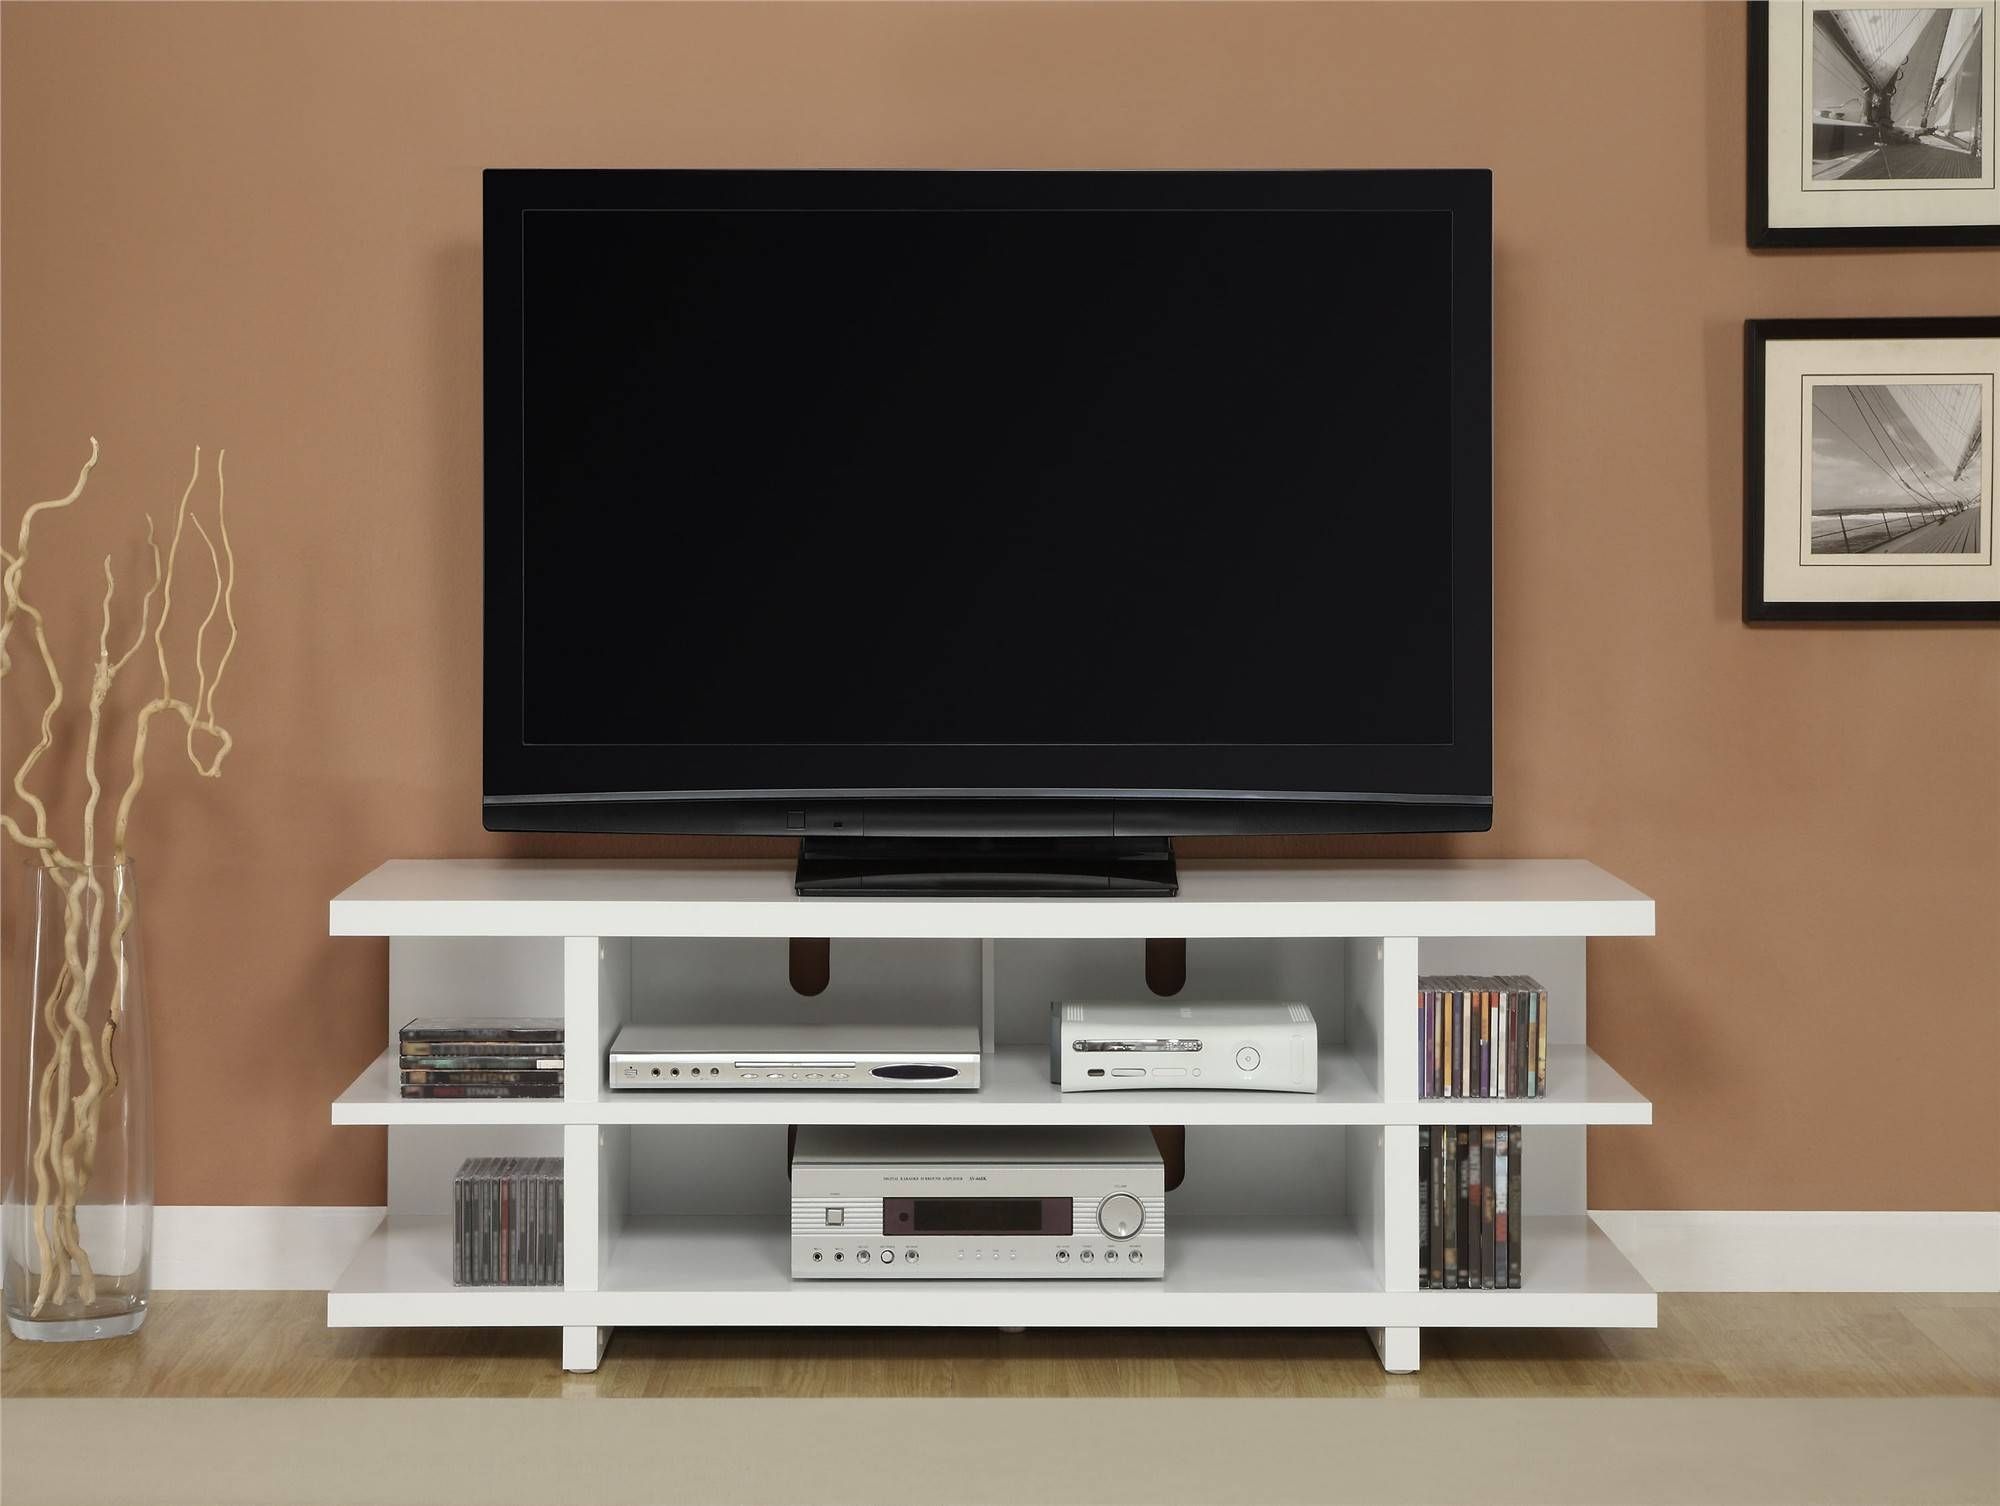 White Stained Wooden Tv Stand Having Several Open Shelves For Inside Modern Tv Cabinets For Flat Screens (Photo 1 of 15)